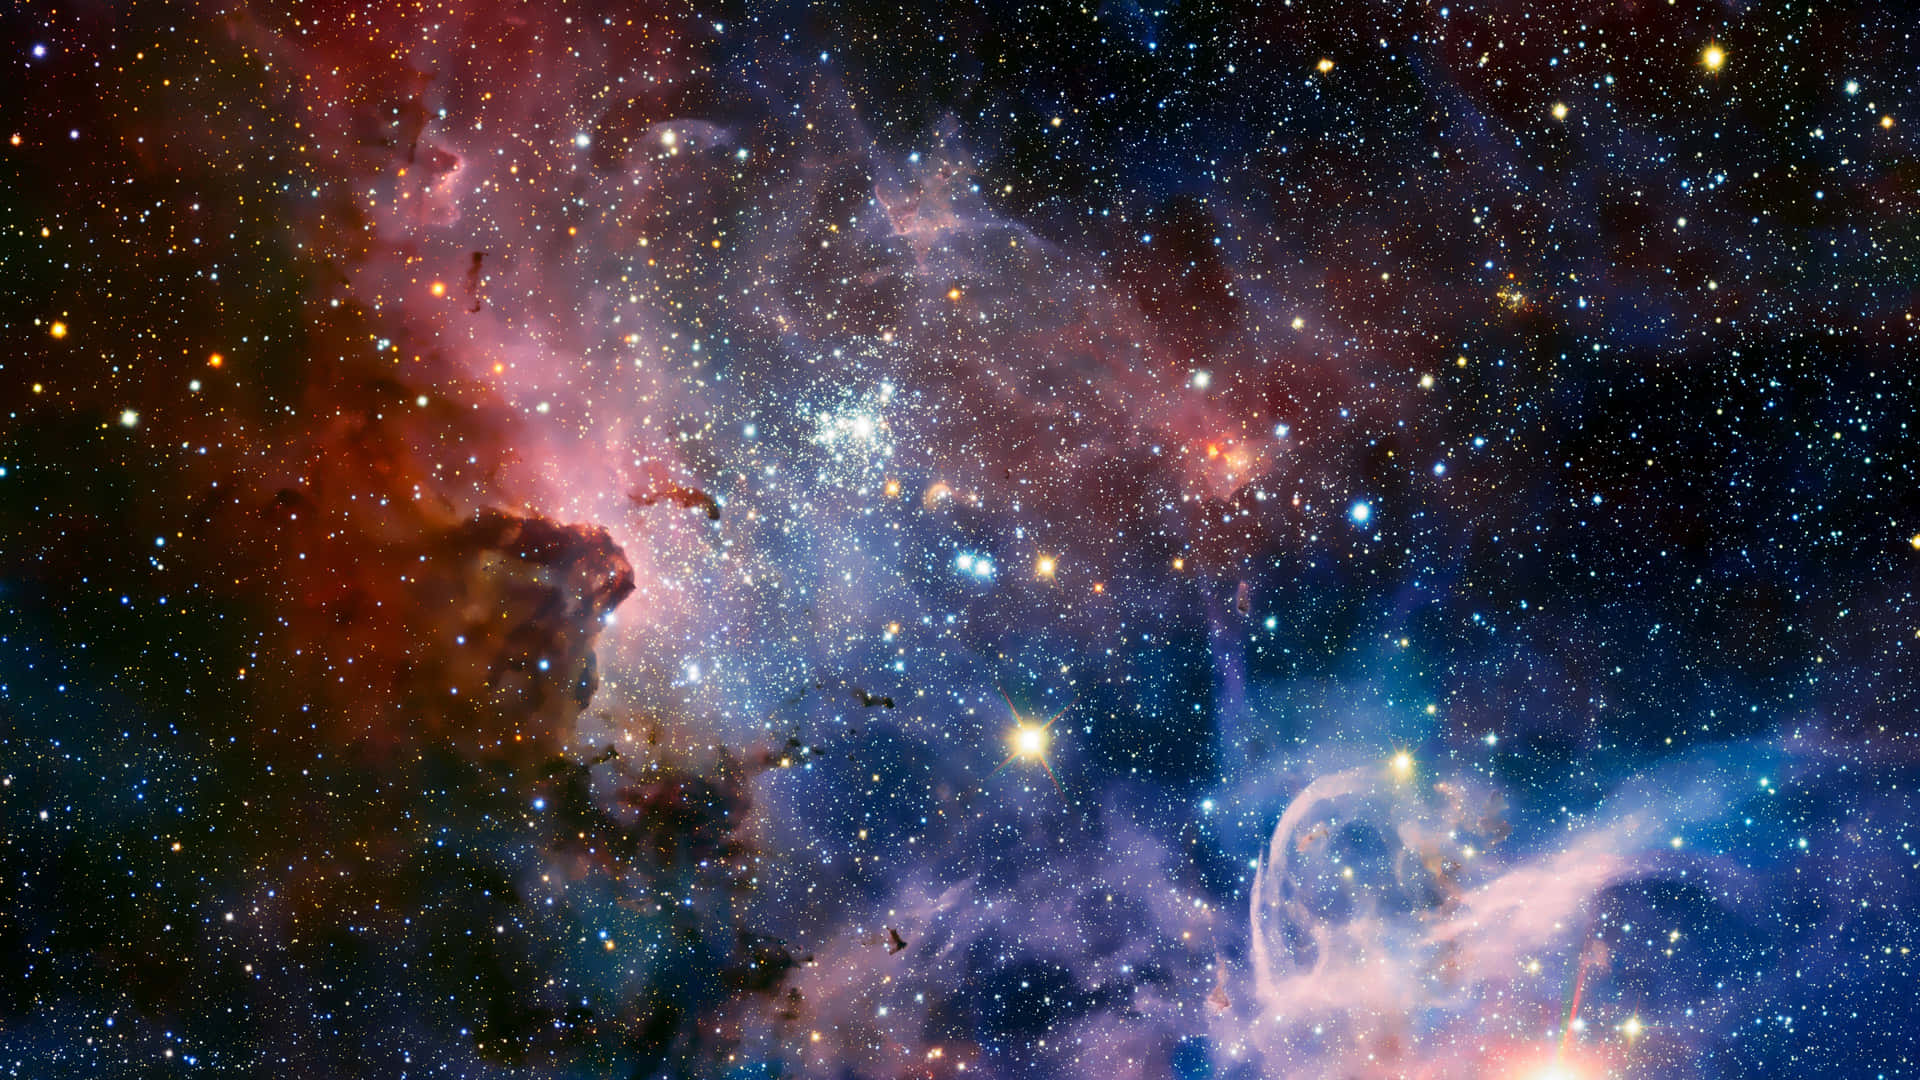 Caption: A Dazzling Display of Cosmic Rays Wallpaper